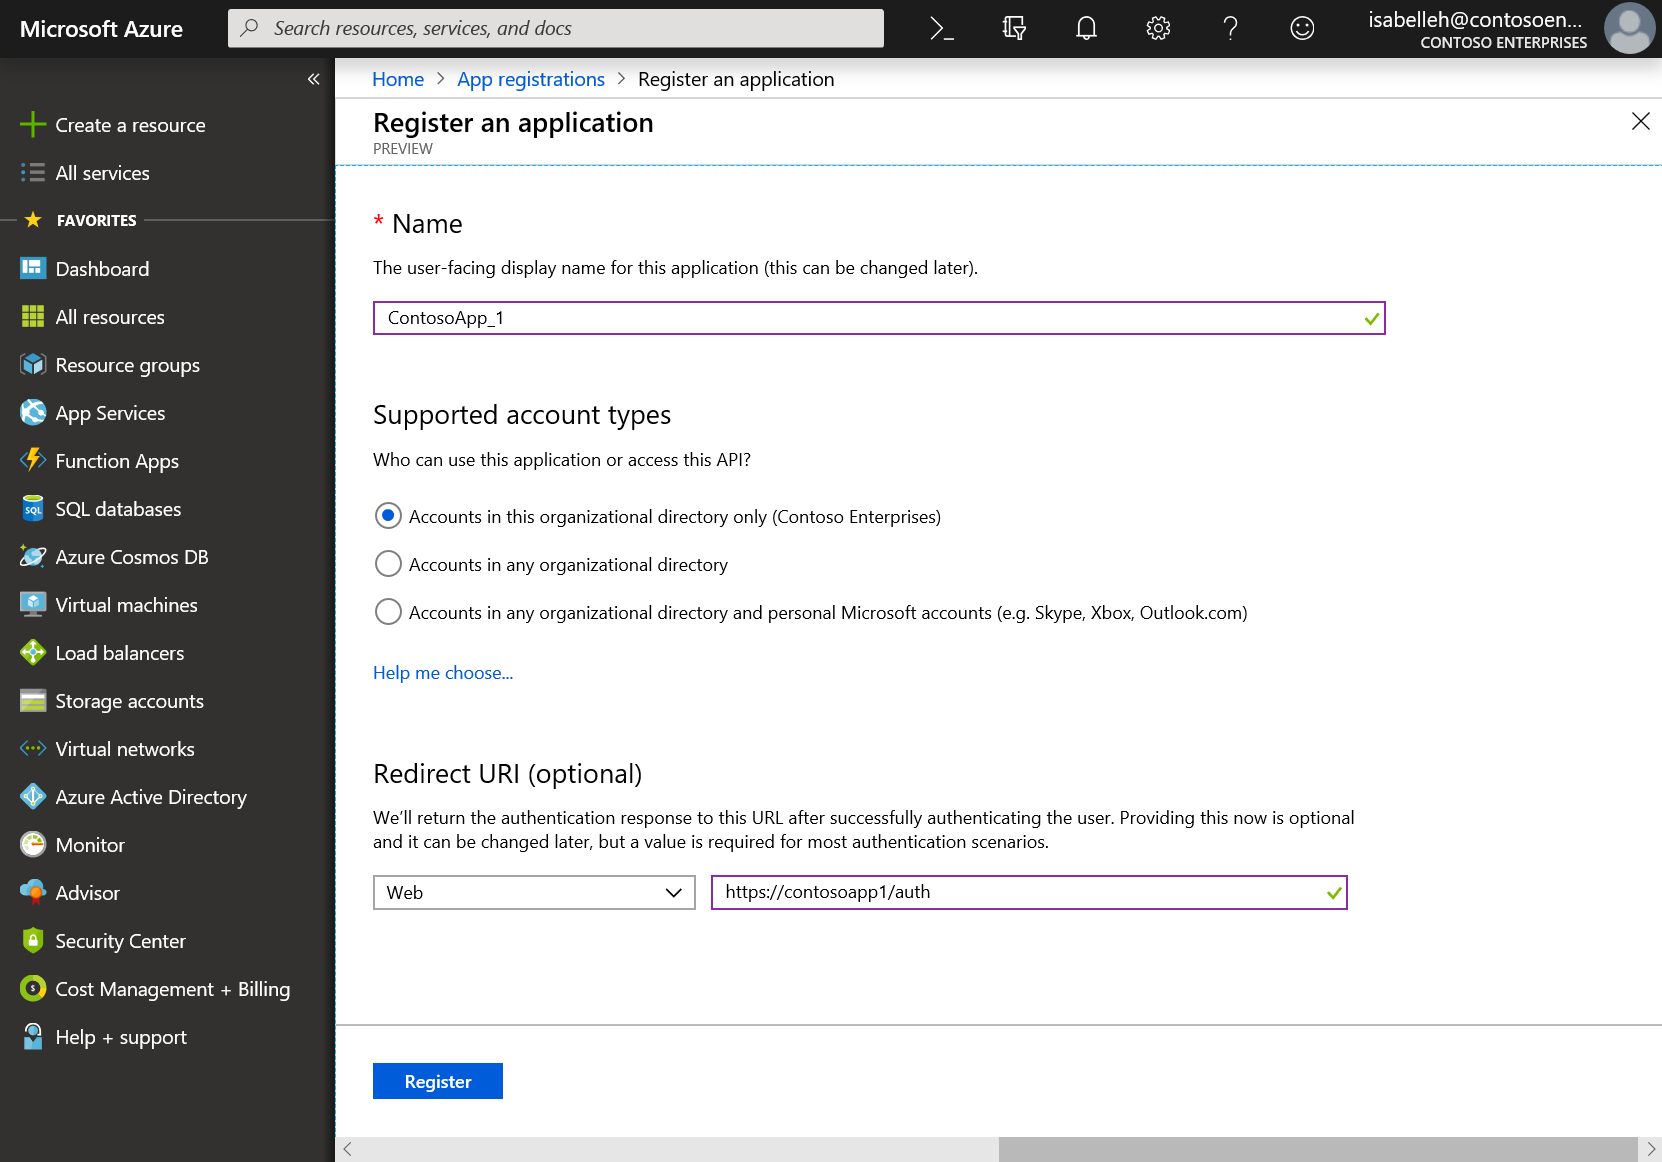 Register a new application in the Azure portal